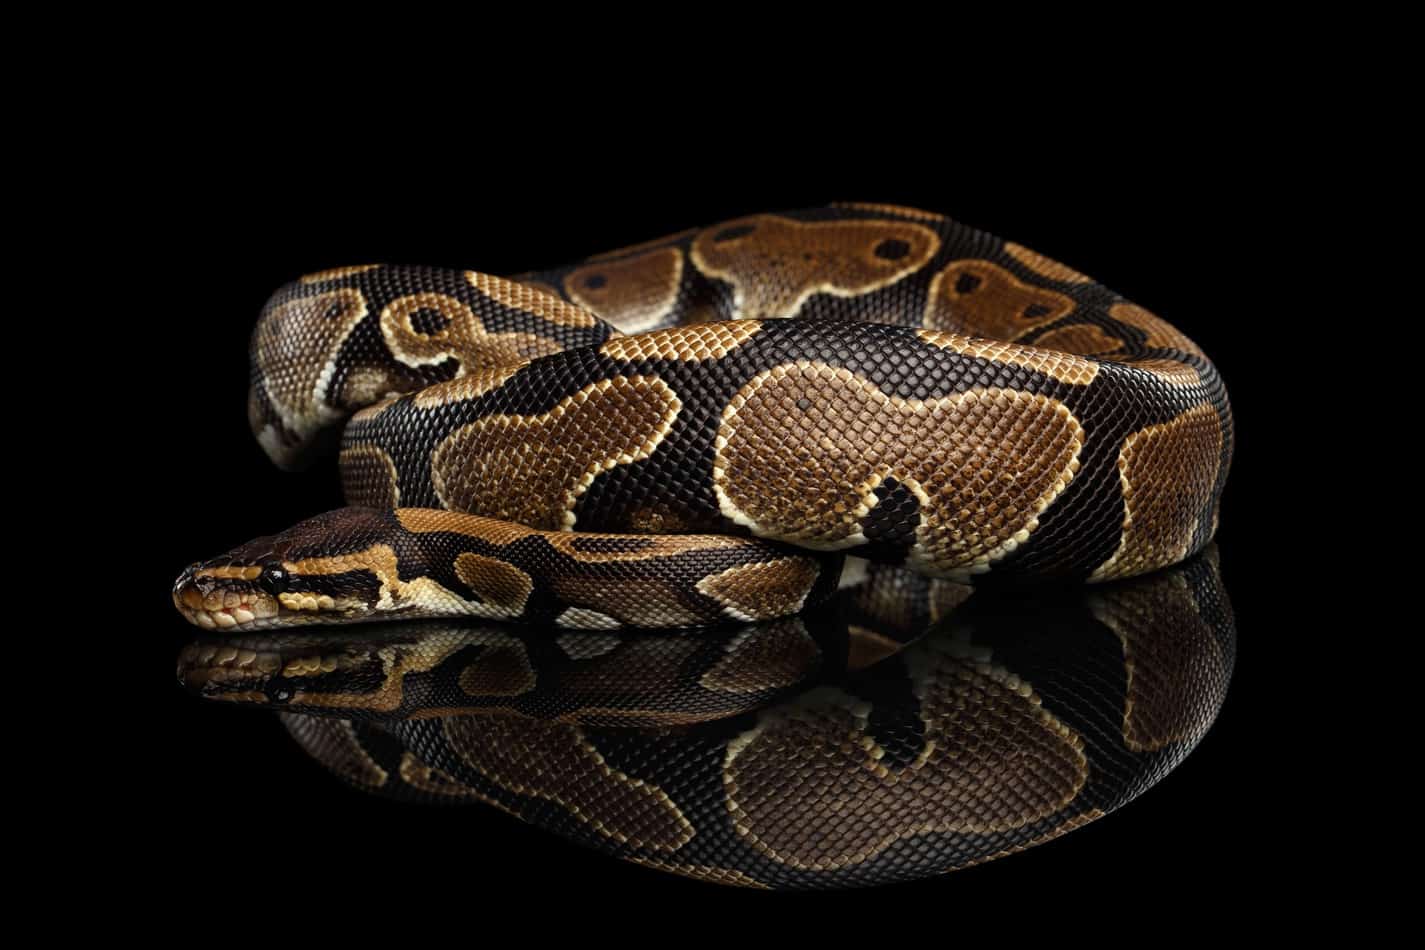 bp Banana Ball Pythons: A Complete Guide with Pictures and Facts